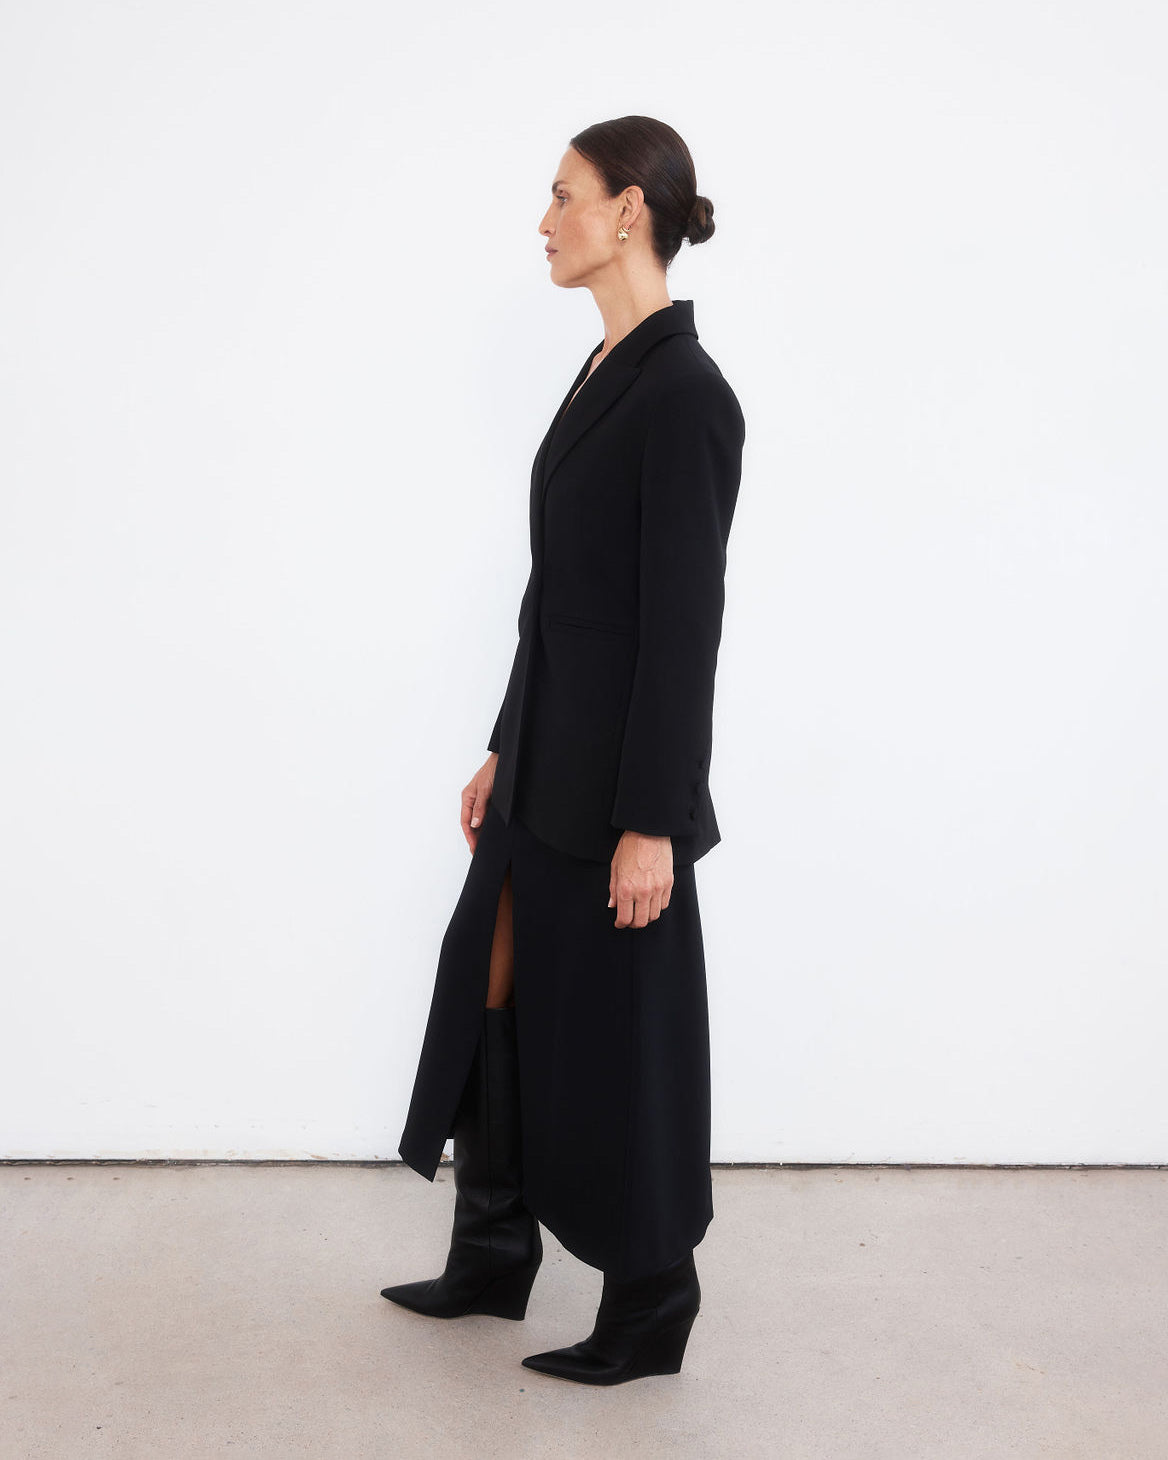 Middle aged women with brown pulled back hair, looking to the left hand side, wearing an all black look with a minimalist tailored black blazer, maxi length skirt with middle split and black wedge pointed boots